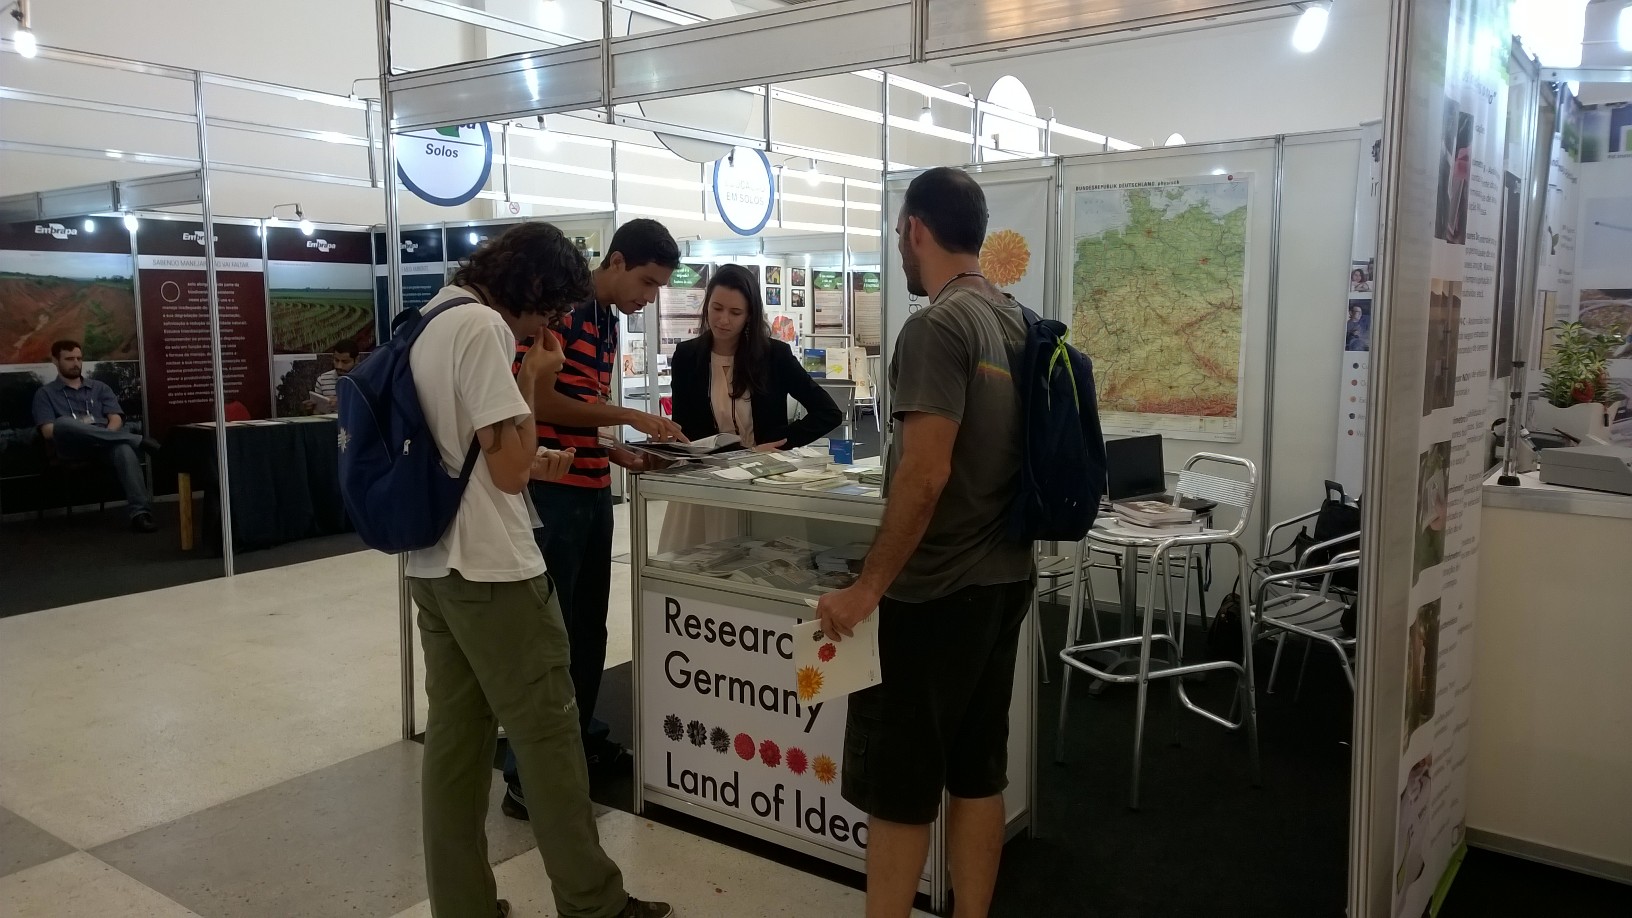 Silvia Bauer from the DAAD offering advice on the “Research in Germany” stand